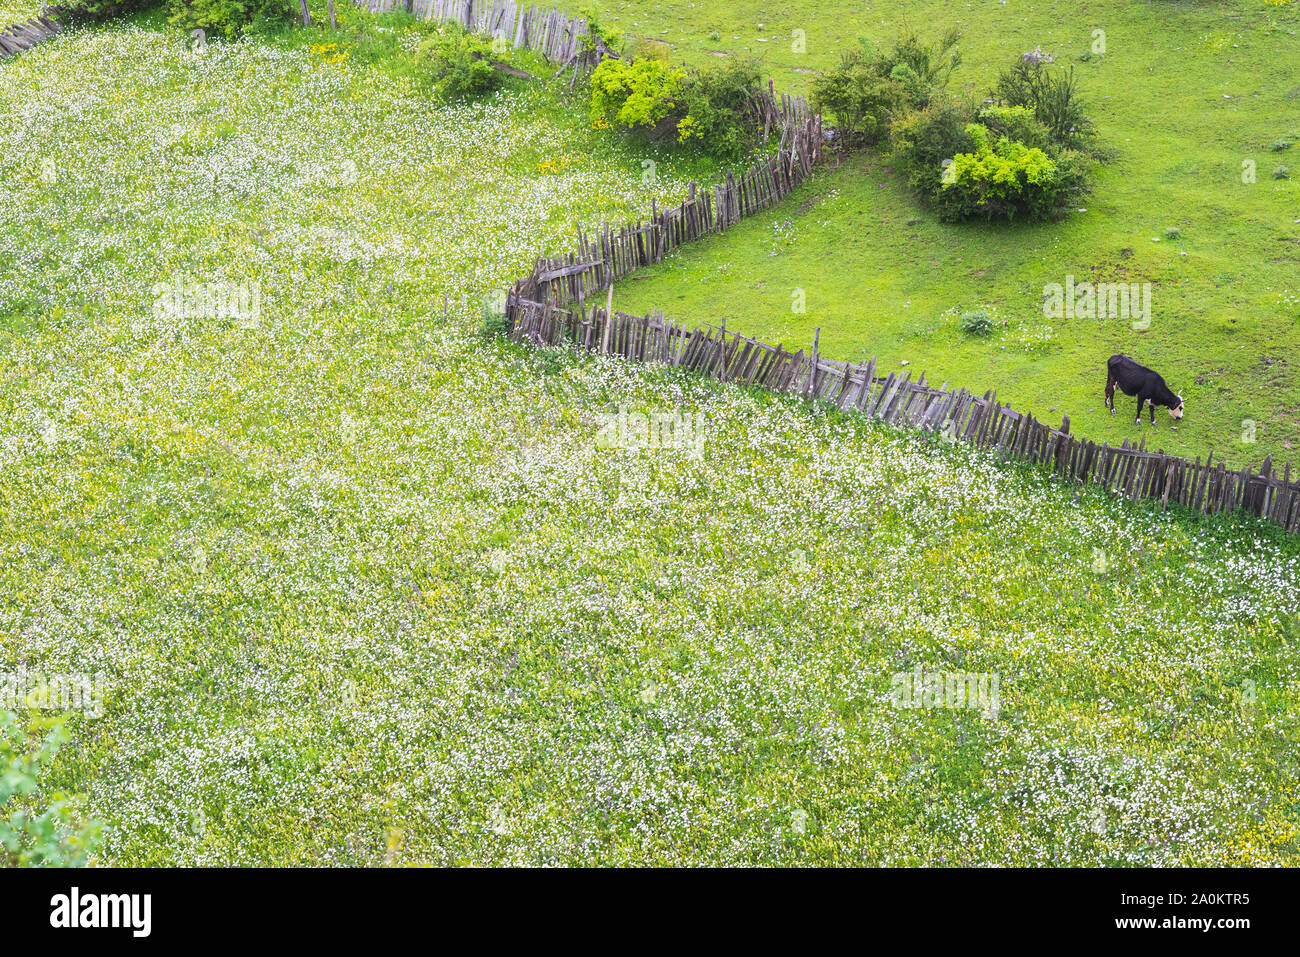 Field of wildflowers, mostly chamomiles, an old wooden palisade, and a grazing cow. Location: Mestia, Svaneti, Georgia. Stock Photo